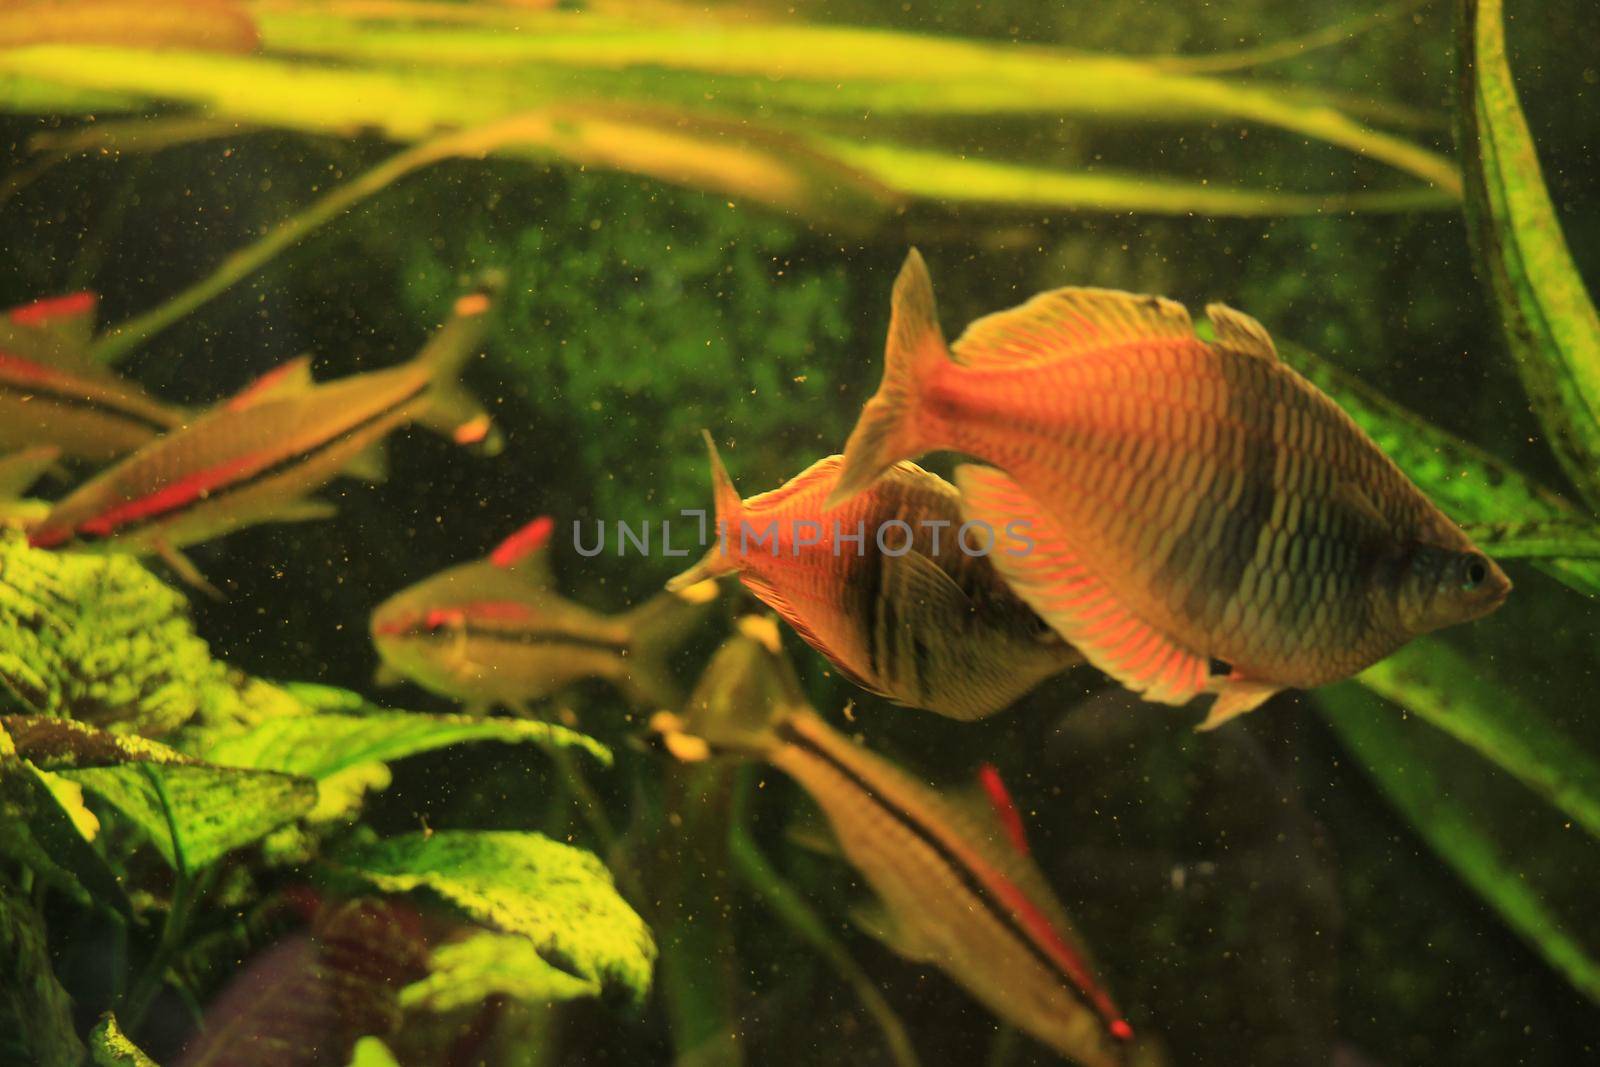 Gourami fishes in a big fish tank